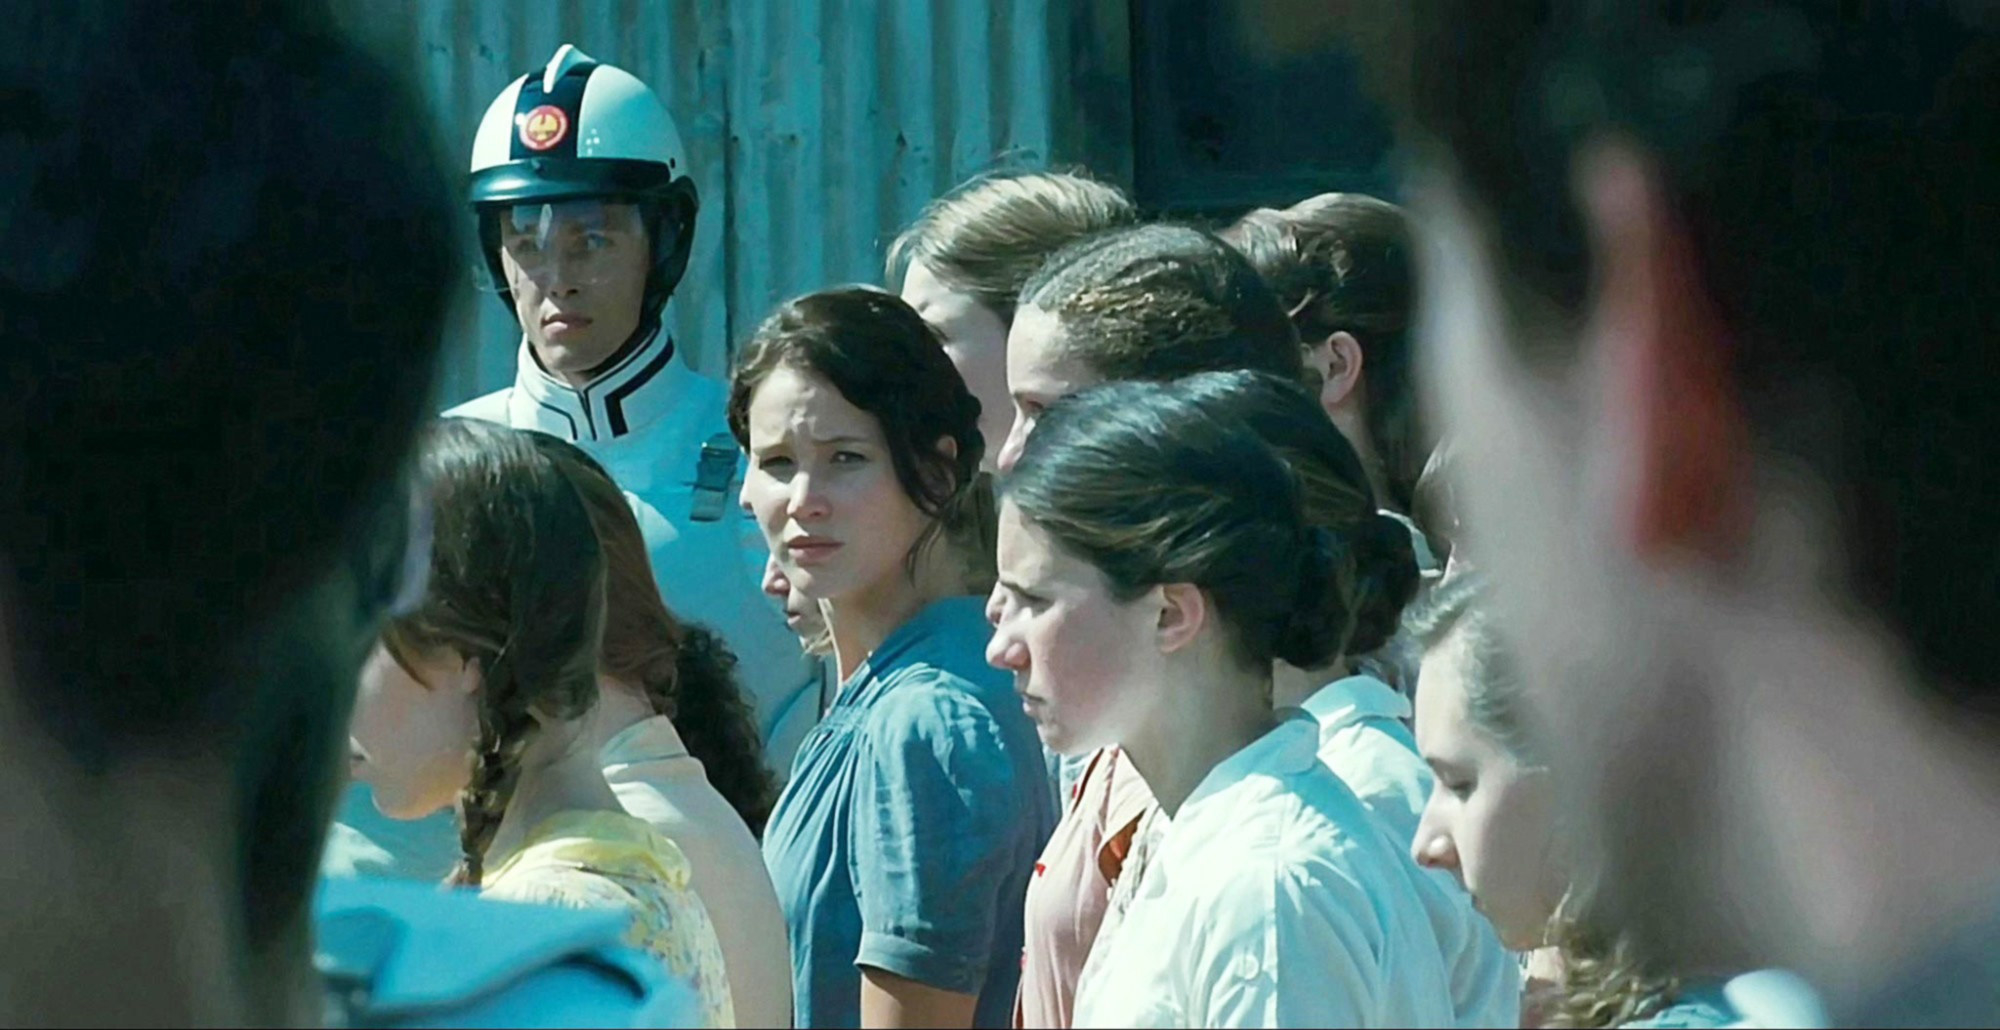 Katniss looking to the side in a crowd